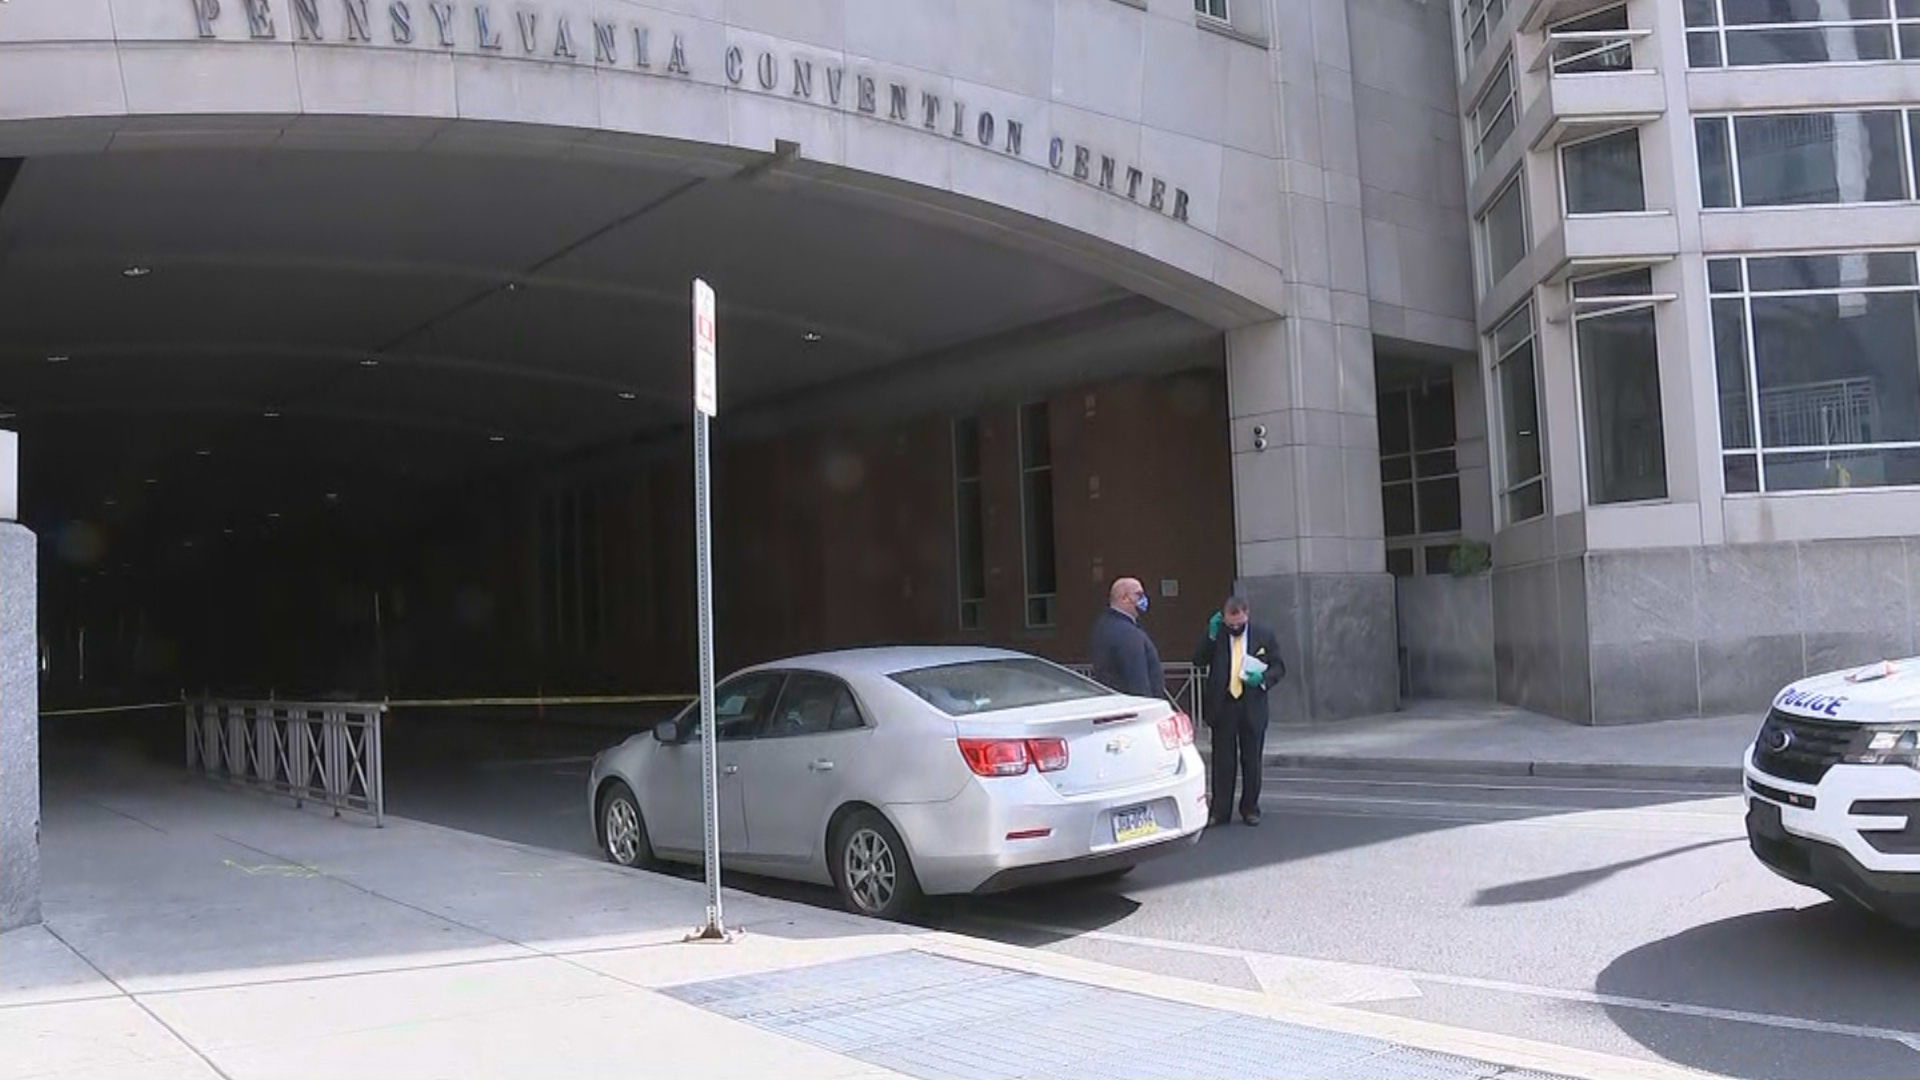 Philadelphia Police: Man Found Dead In Front Of Pennsylvania Convention Center